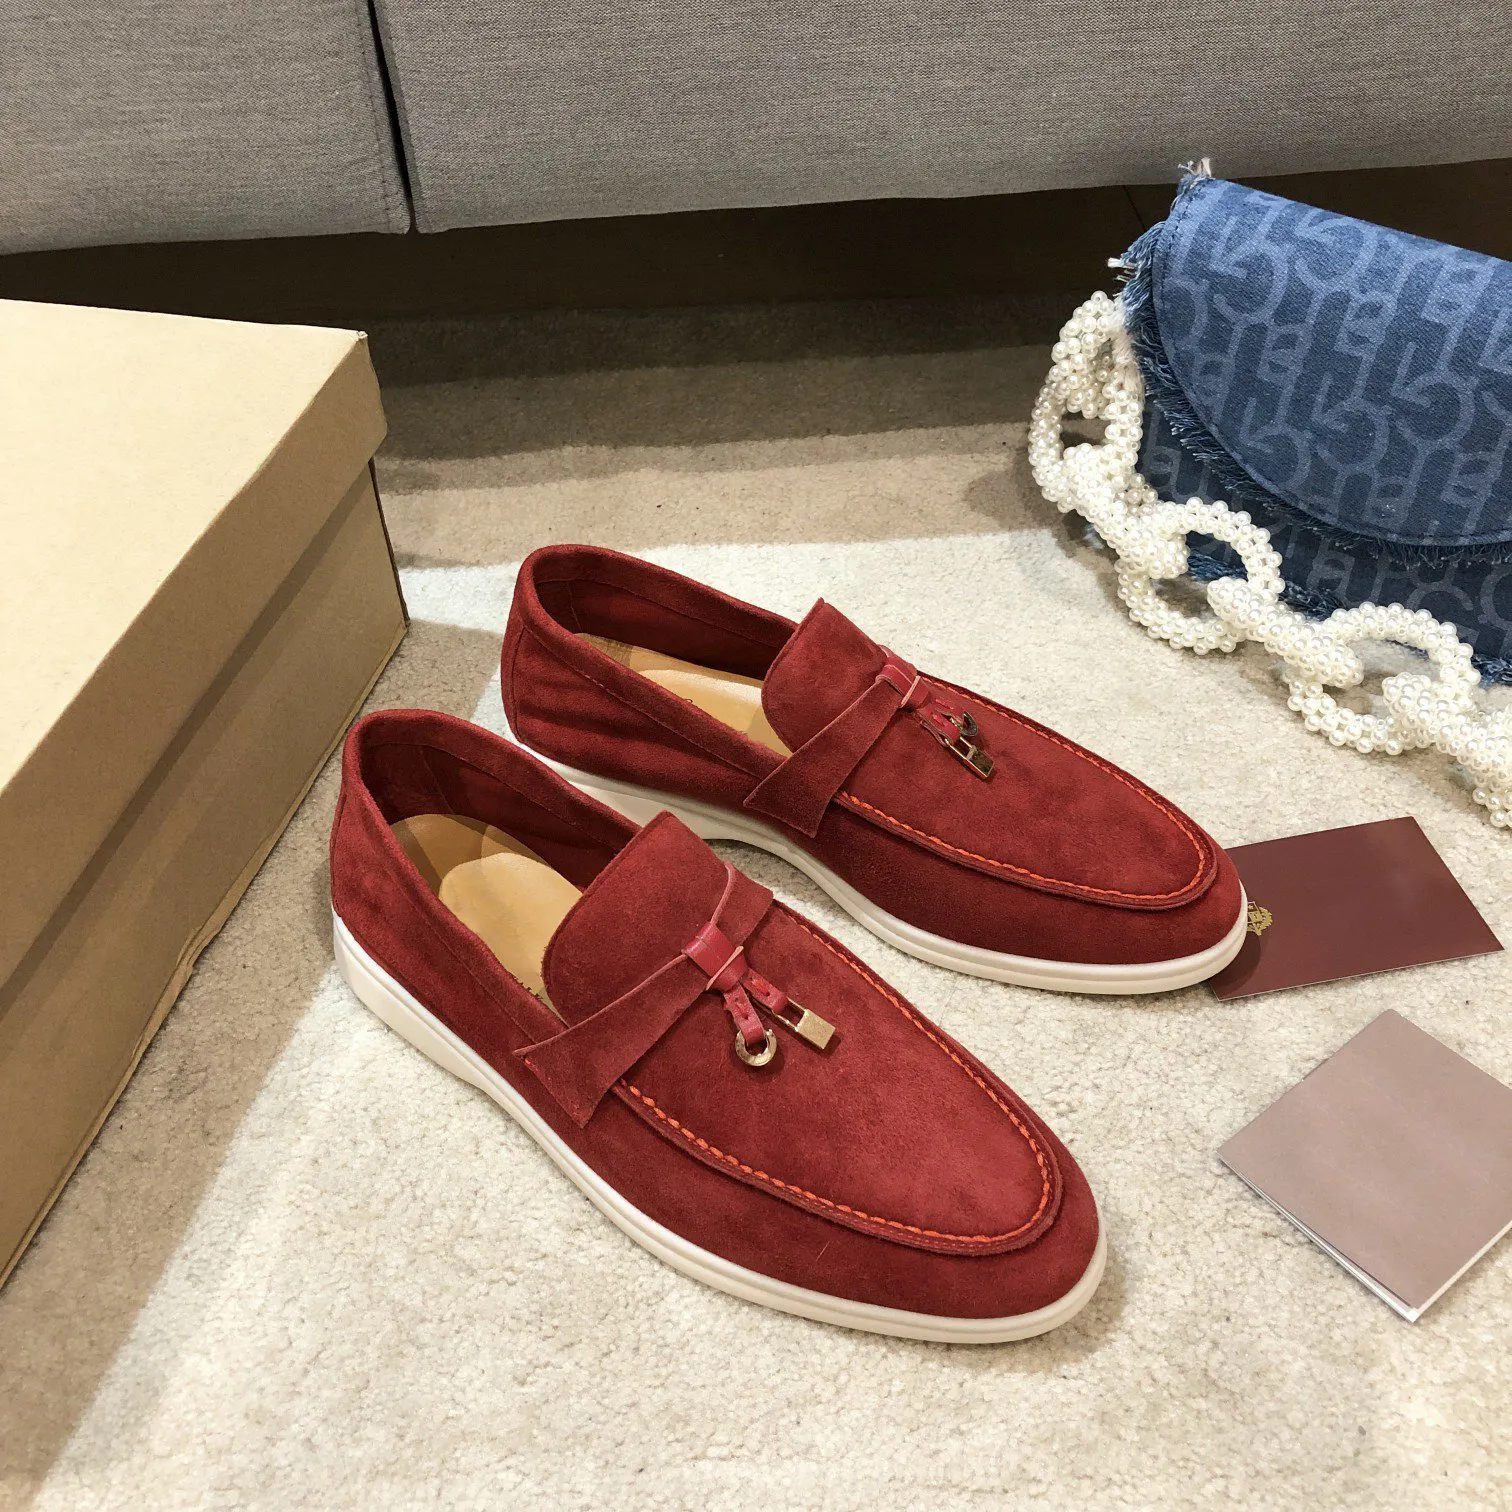 Autumn Women Flat Platform Shoes Sheep Suede High Quality Casual Solid Slip On Ladies Shoes Zapatos De Mujer Zapatos 2022